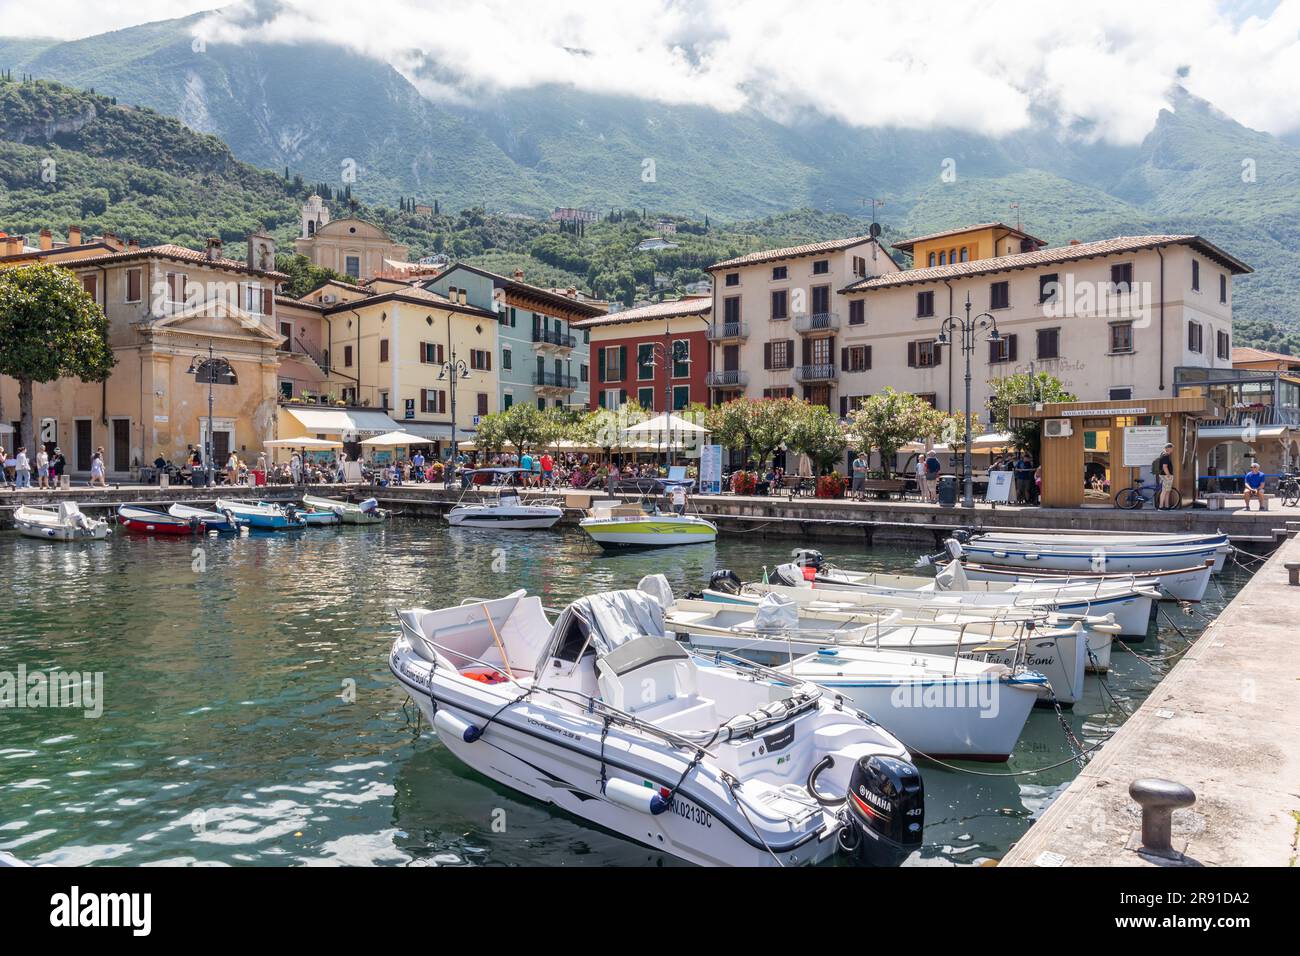 The picturesque port Malcesine in Piazza Guglielmo Marconi which is surrounded by many restaurants and cafes, Malcesine, Lake Garda, Italy, Europe Stock Photo